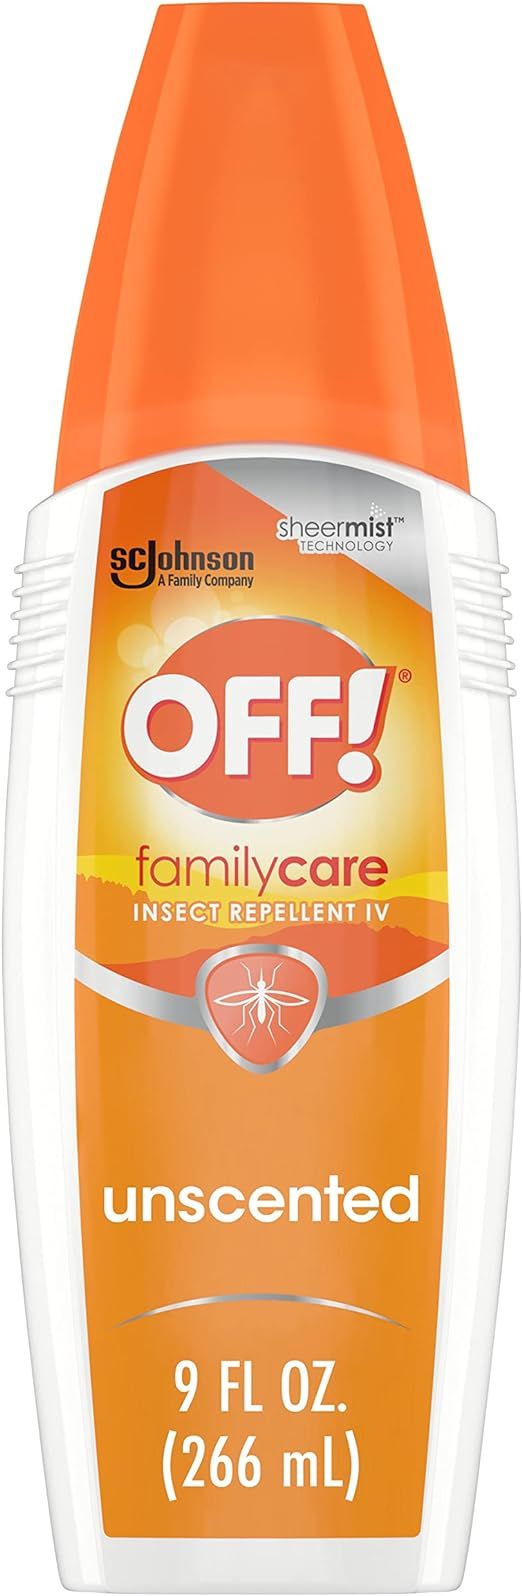 OFF! FamilyCare Insect & Mosquito Repellent Spritz, Unscented Bug spray with Aloe-Vera, 7% Deet, ... | Amazon (US)